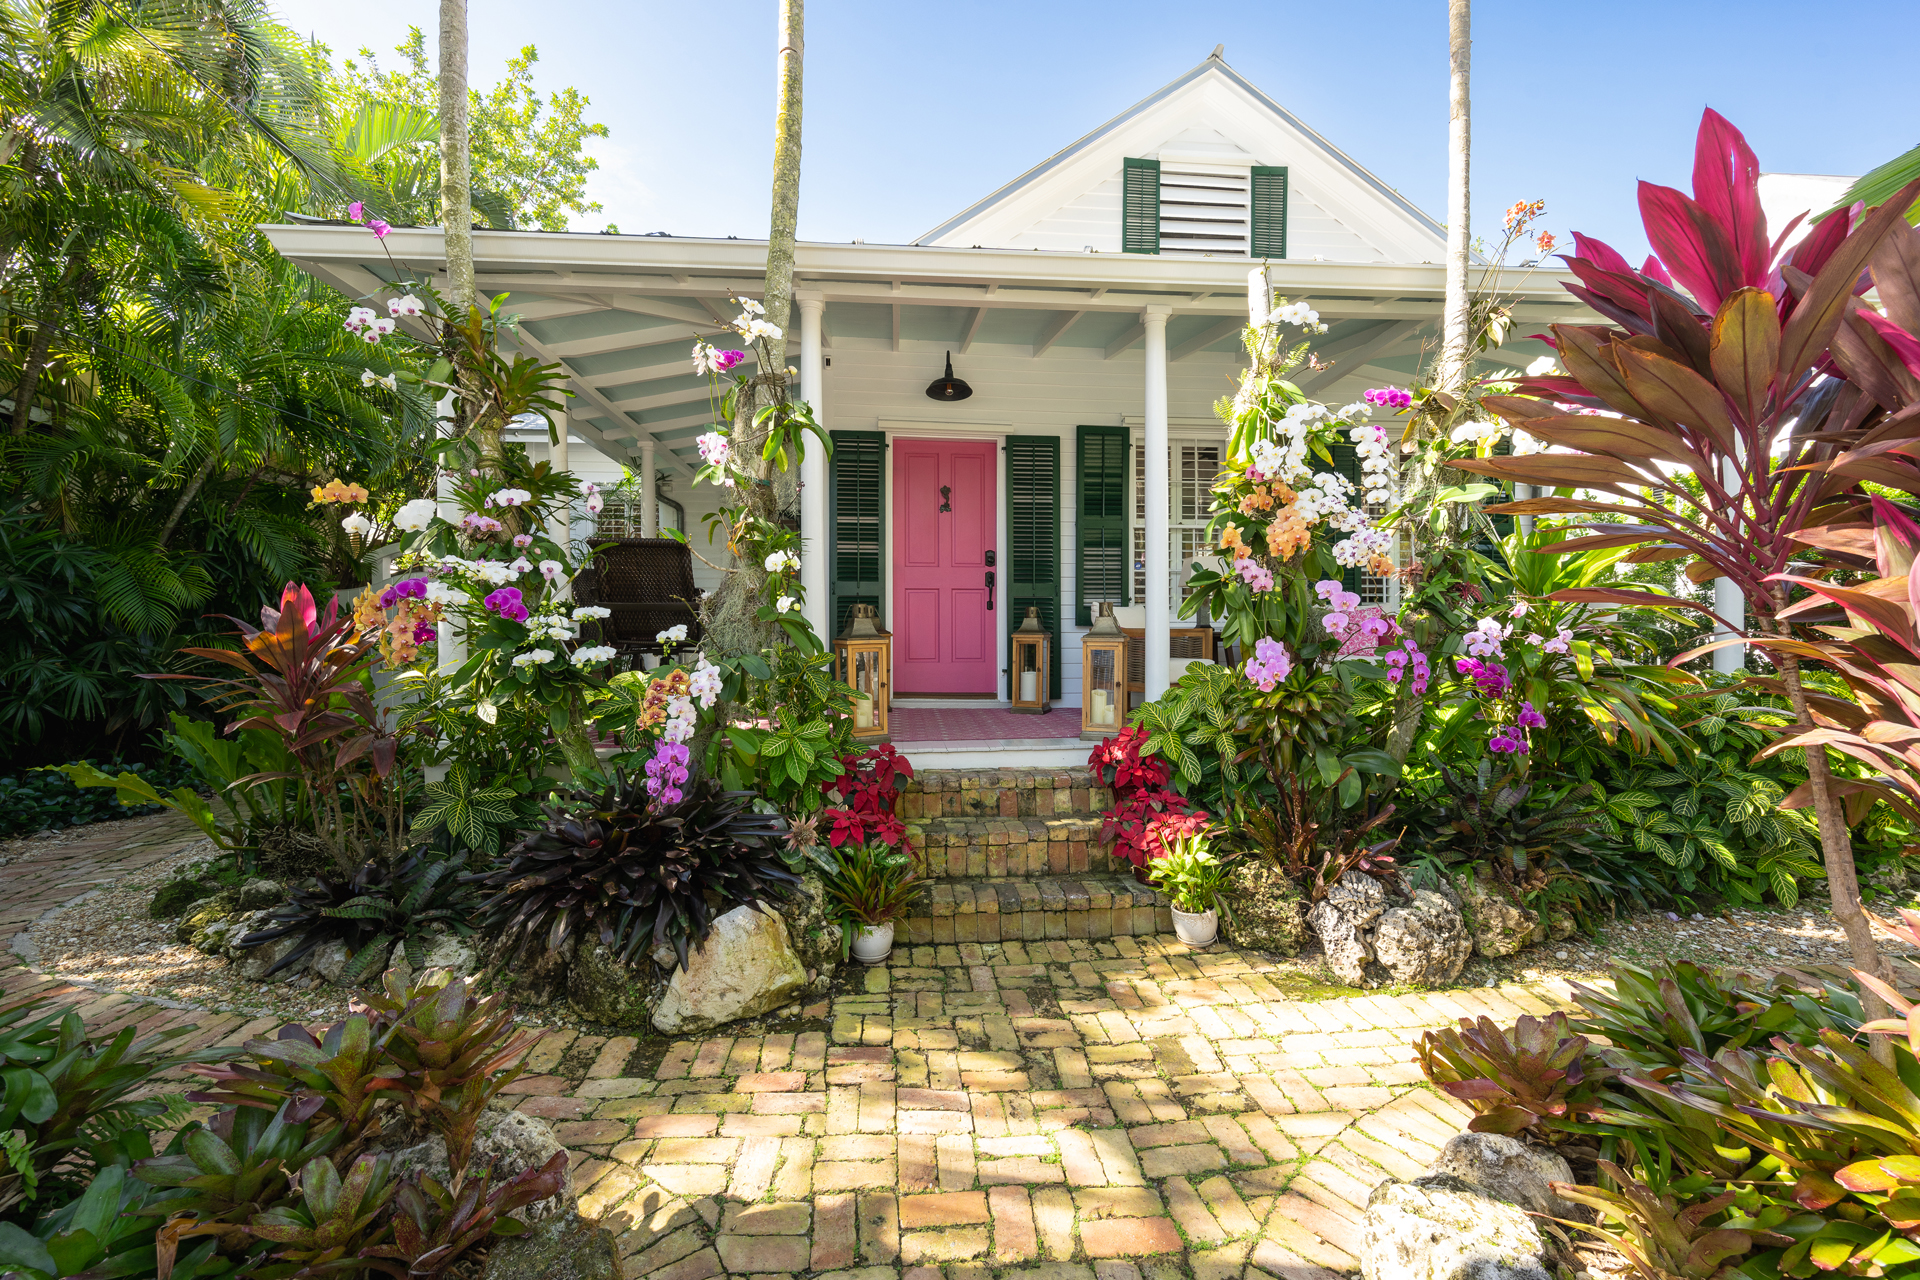 Key West Real Estate: The Orchid House, 526 Frances St.